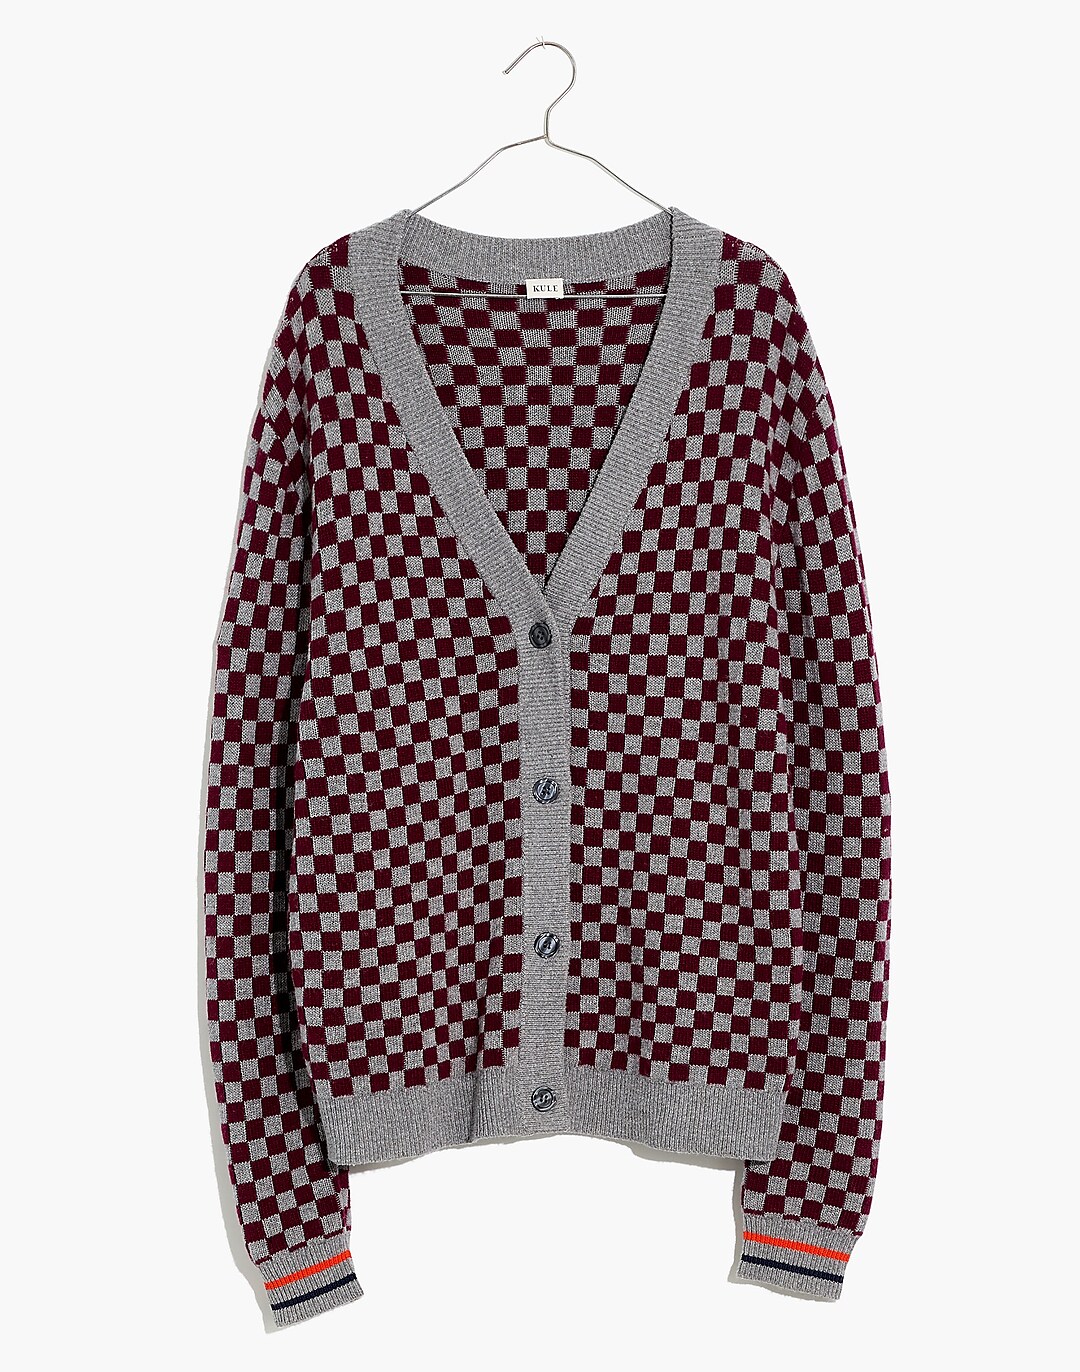 The Check Please - Taupe/Indigo Cardigan Sweater by KULE | XL